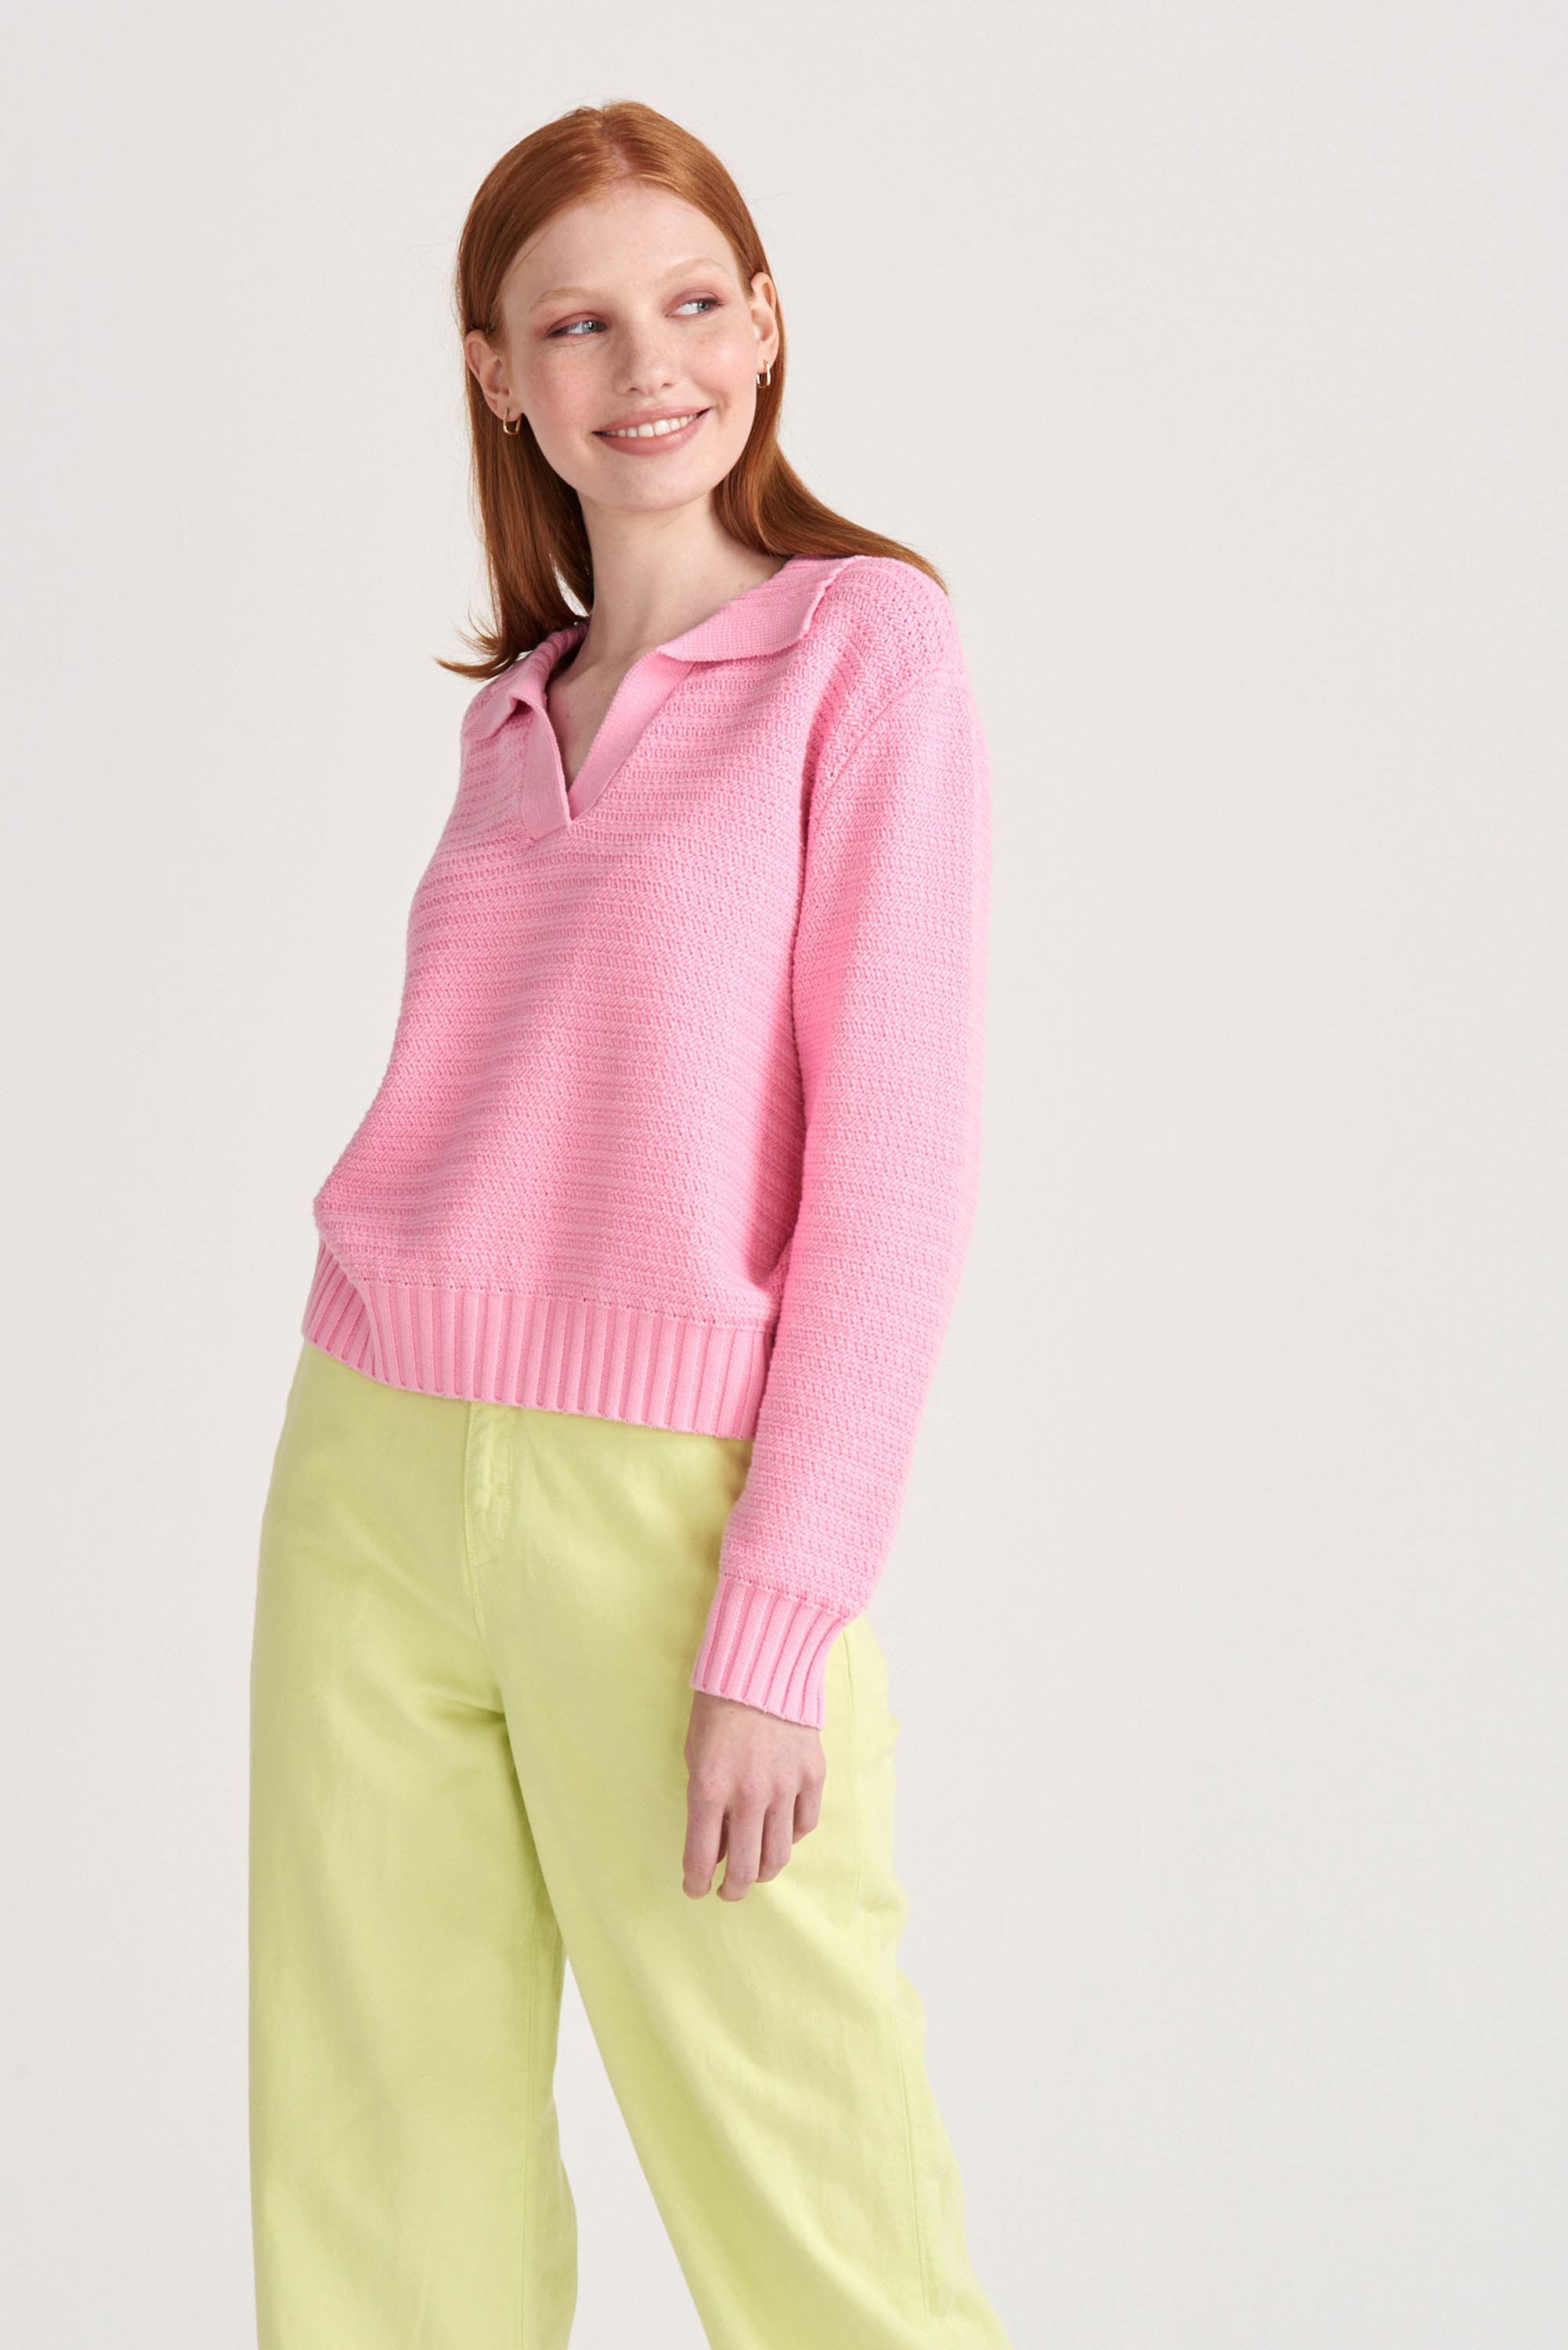 Red haired female model wearing Jumper1234 Pink cotton jumper with a collar in a fabulous all over herringbone stitch